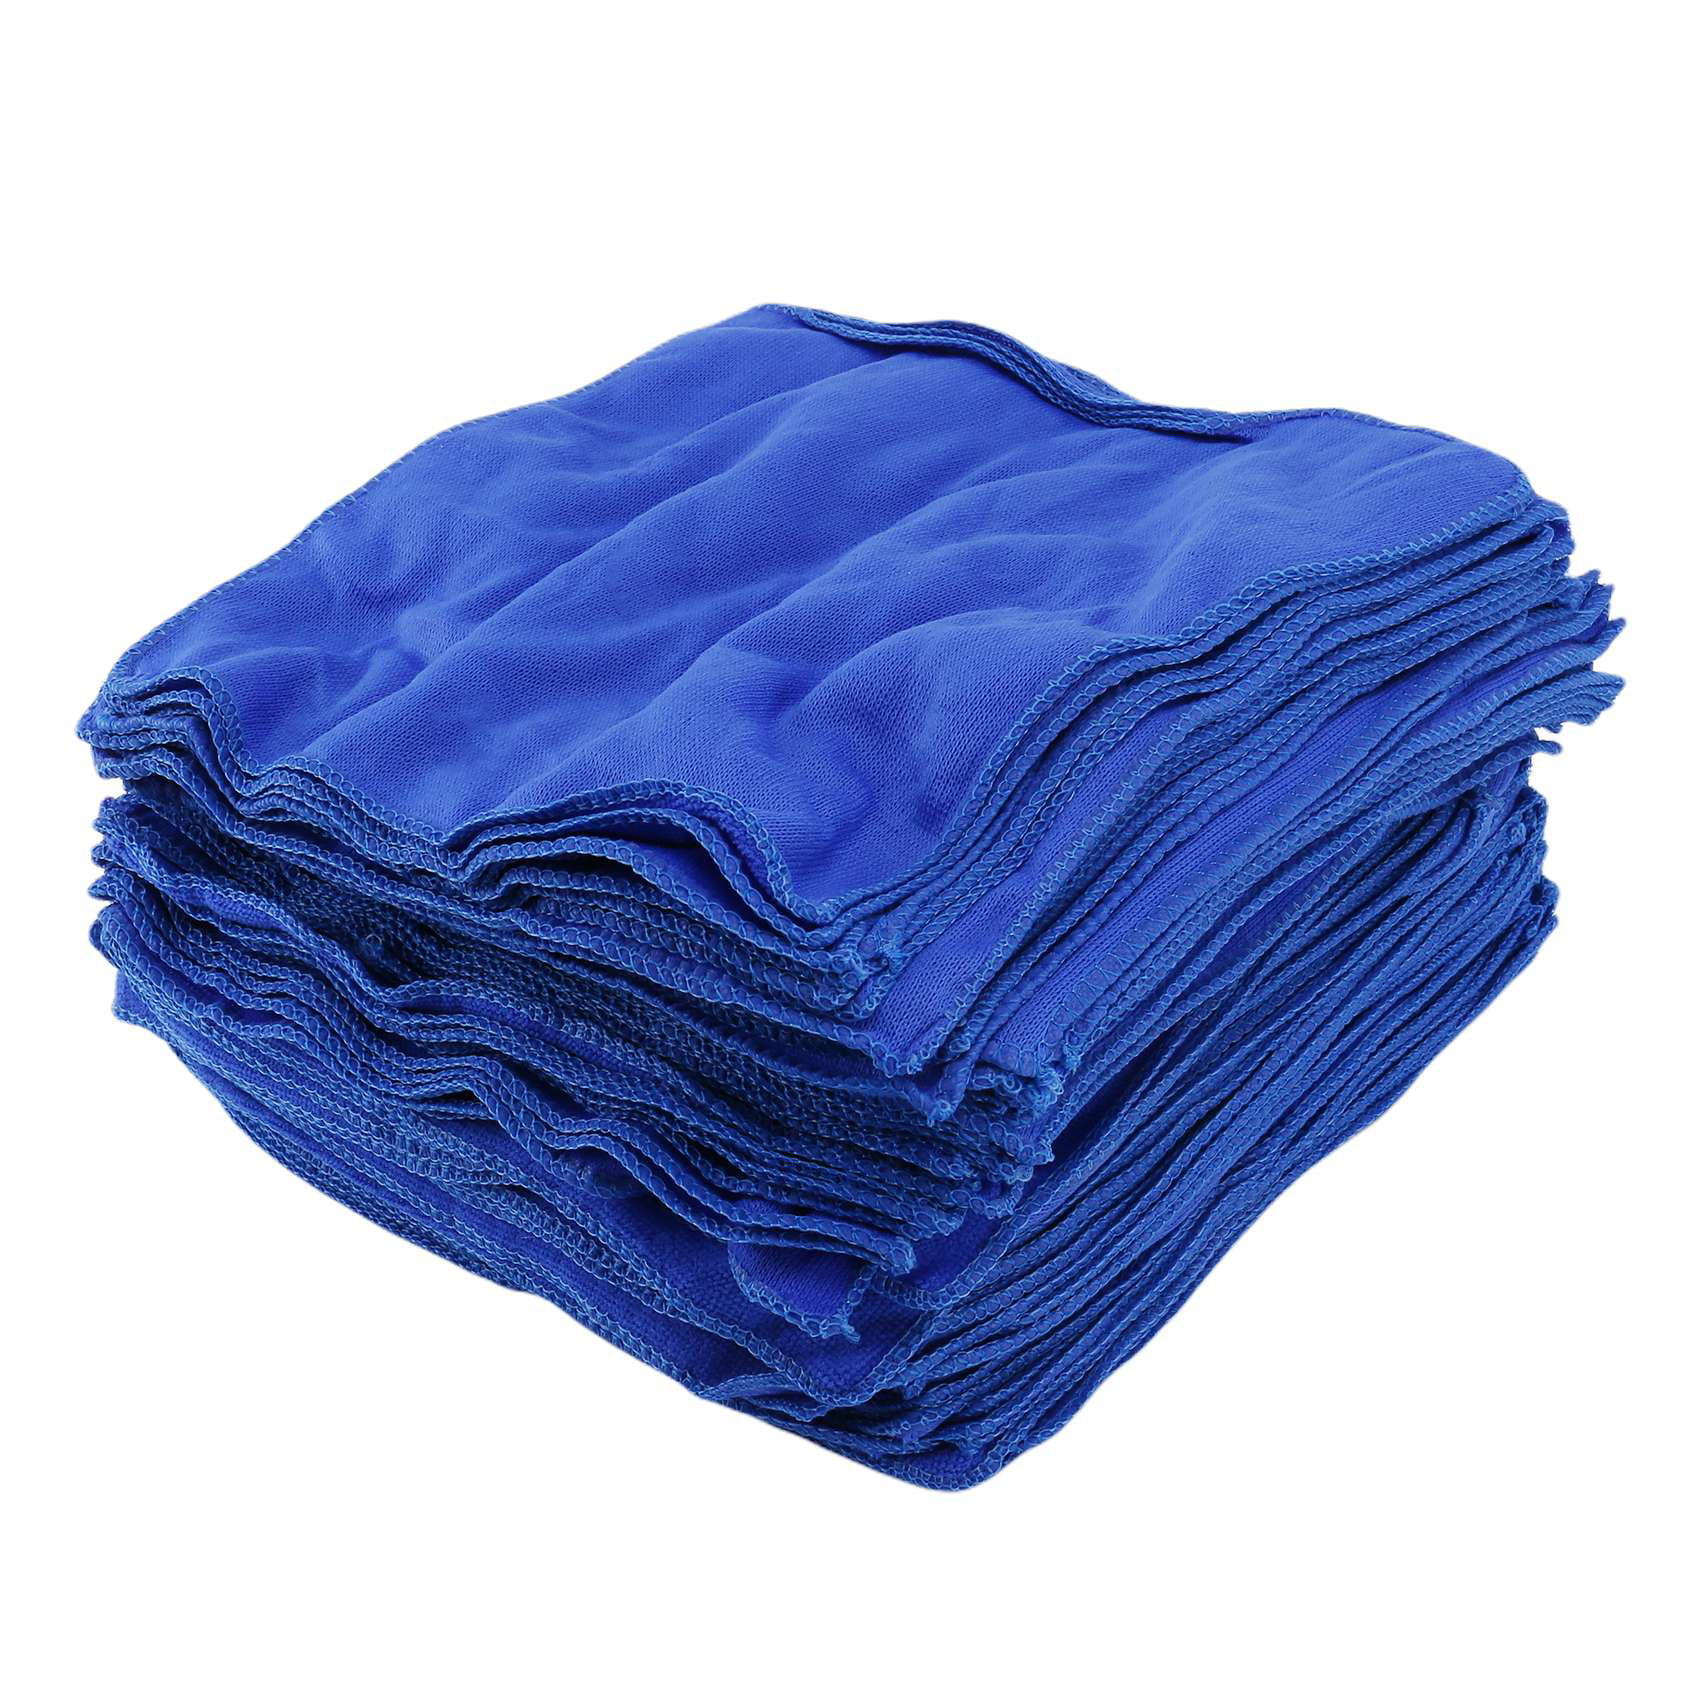 100X Microfiber Cleaning Cloth Towel Auto Care Wash Polishing Detailing Towels 